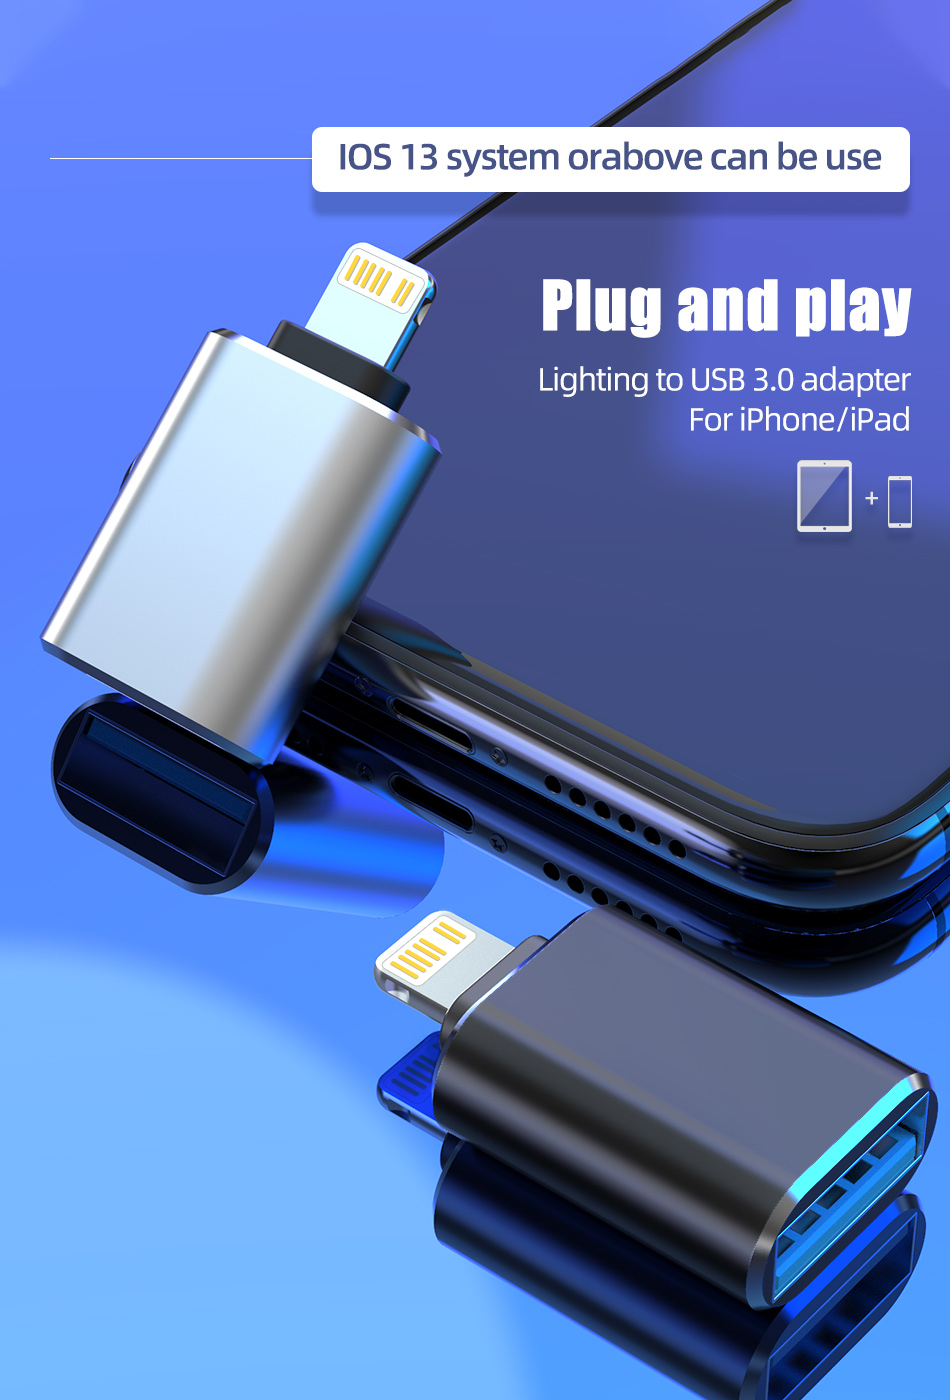 USB 3.0 OTG Adapter For iPhone 13 12 11 Pro XS Max XR X 8 Plus 7 6s iPad  Lighting Male to USB 3.0 Adapter for iOS 13 above